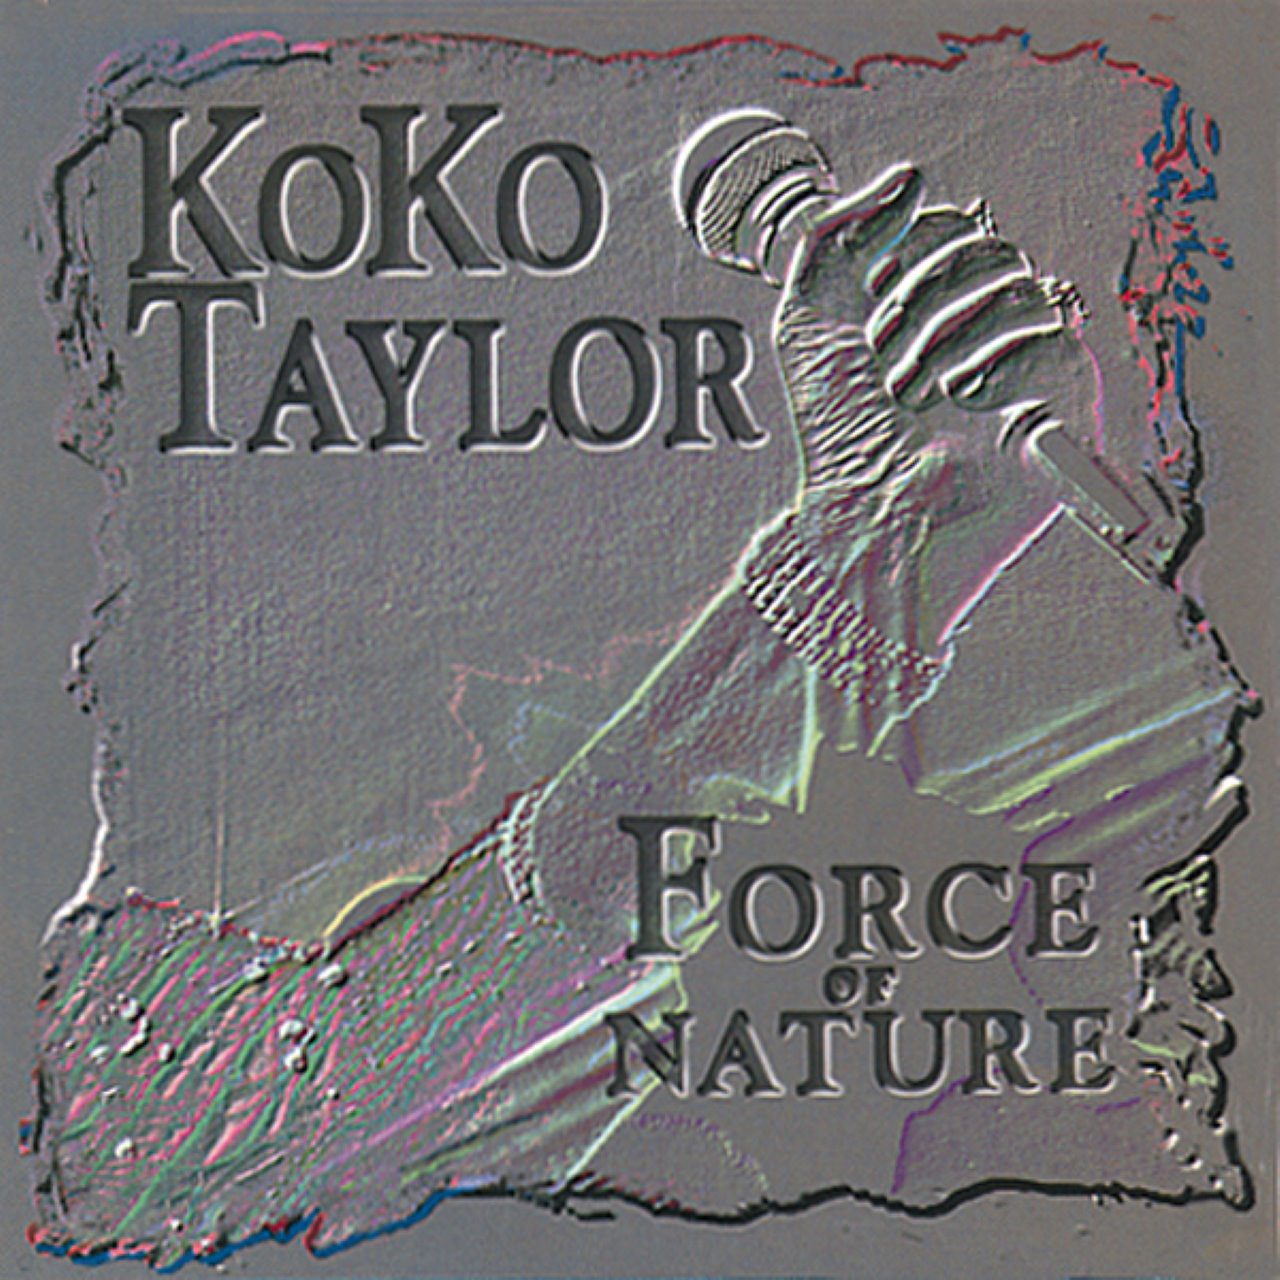 Koko Taylor – Force Of Nature cover album